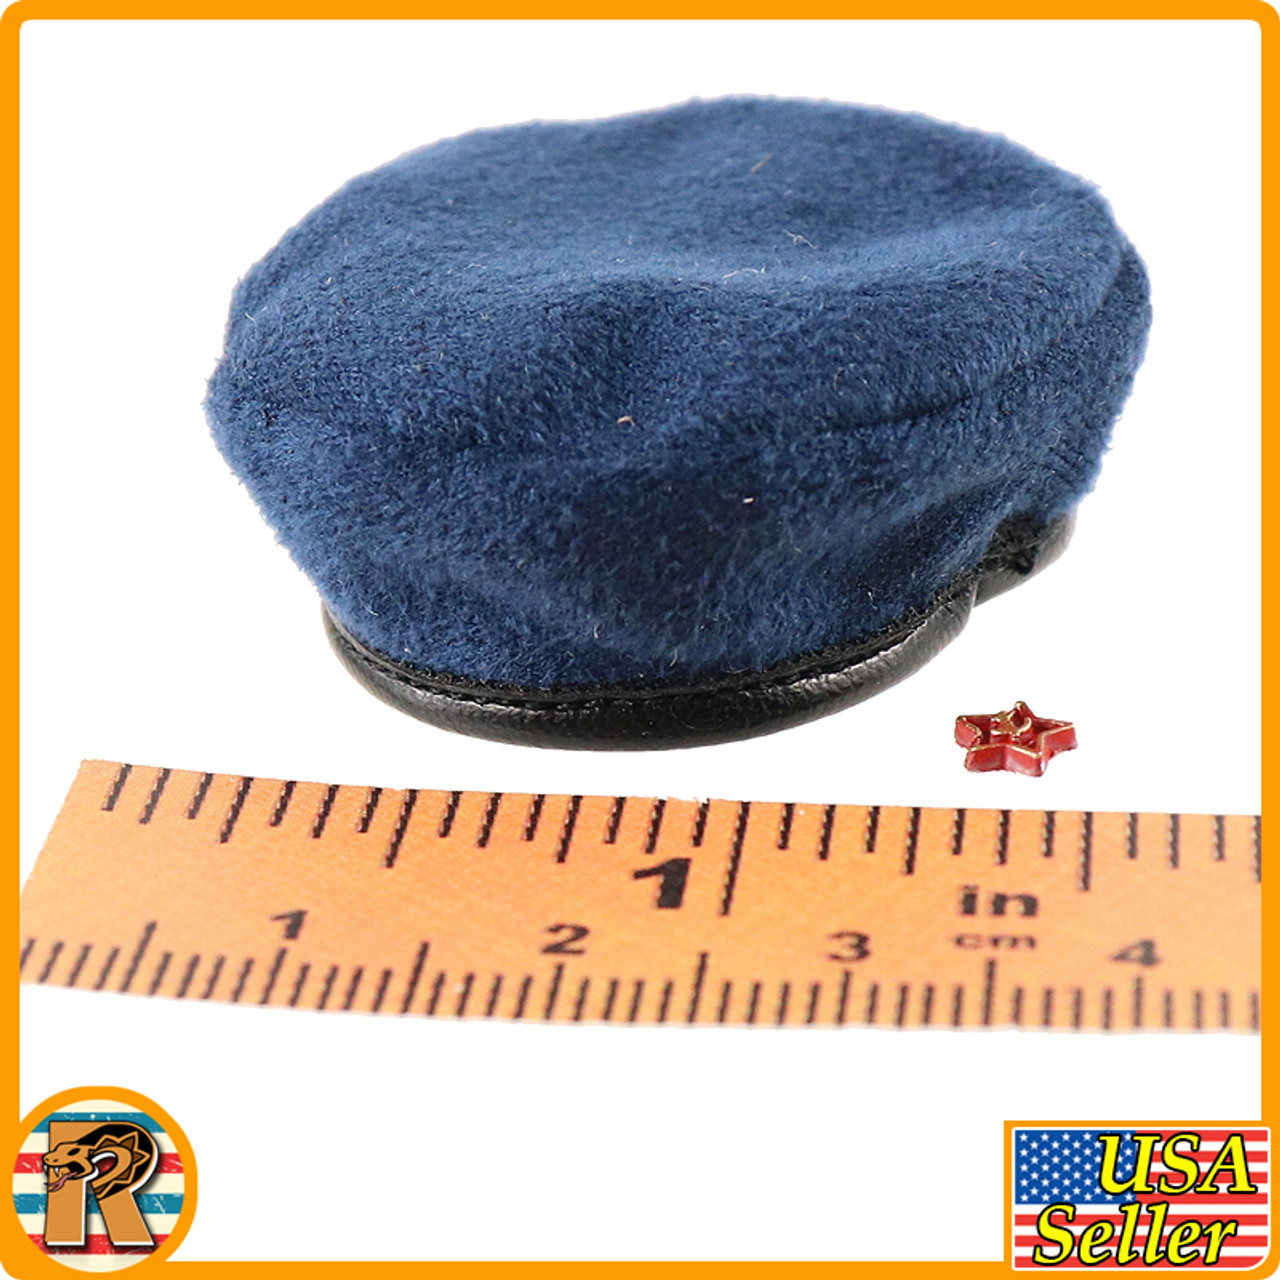 Red Army Female Medic - Blue Beret w/ Badge #1 - 1/6 Scale -